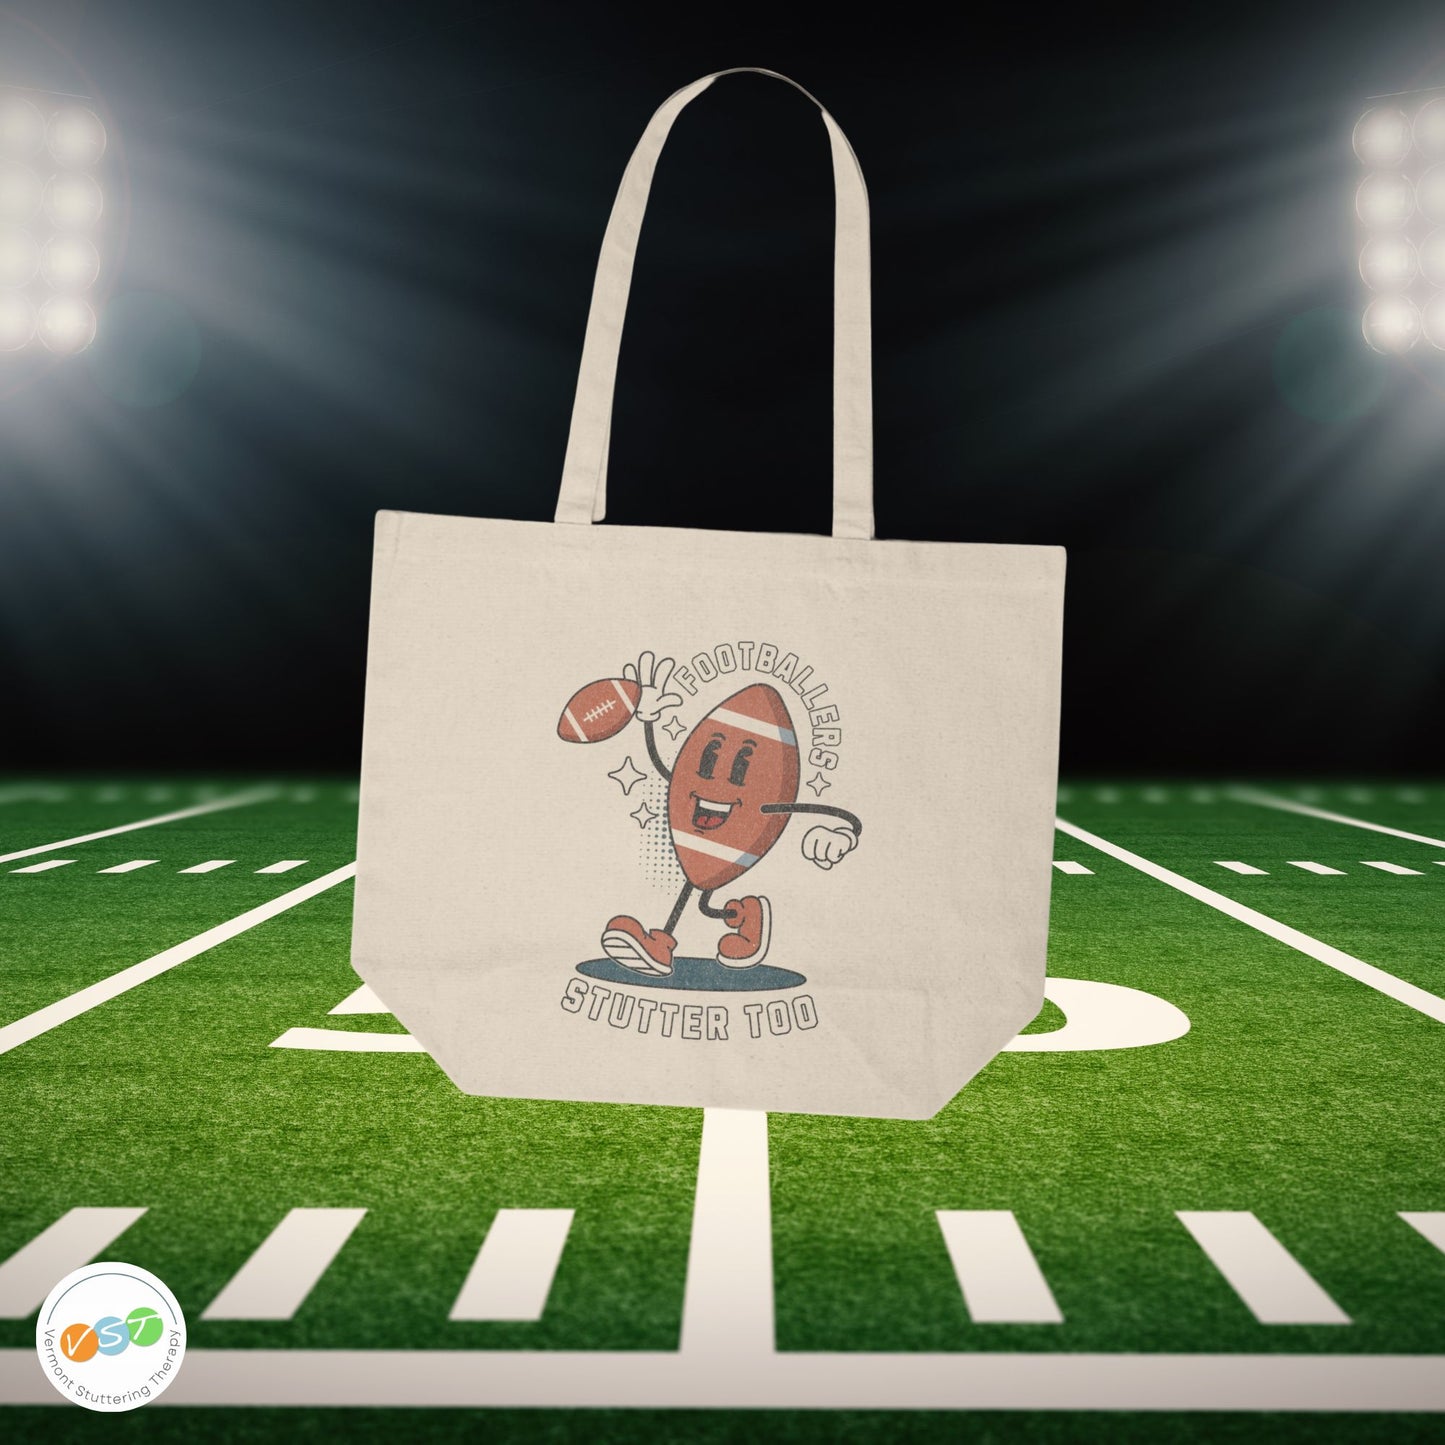 Footballers Stutter Too Canvas Tote